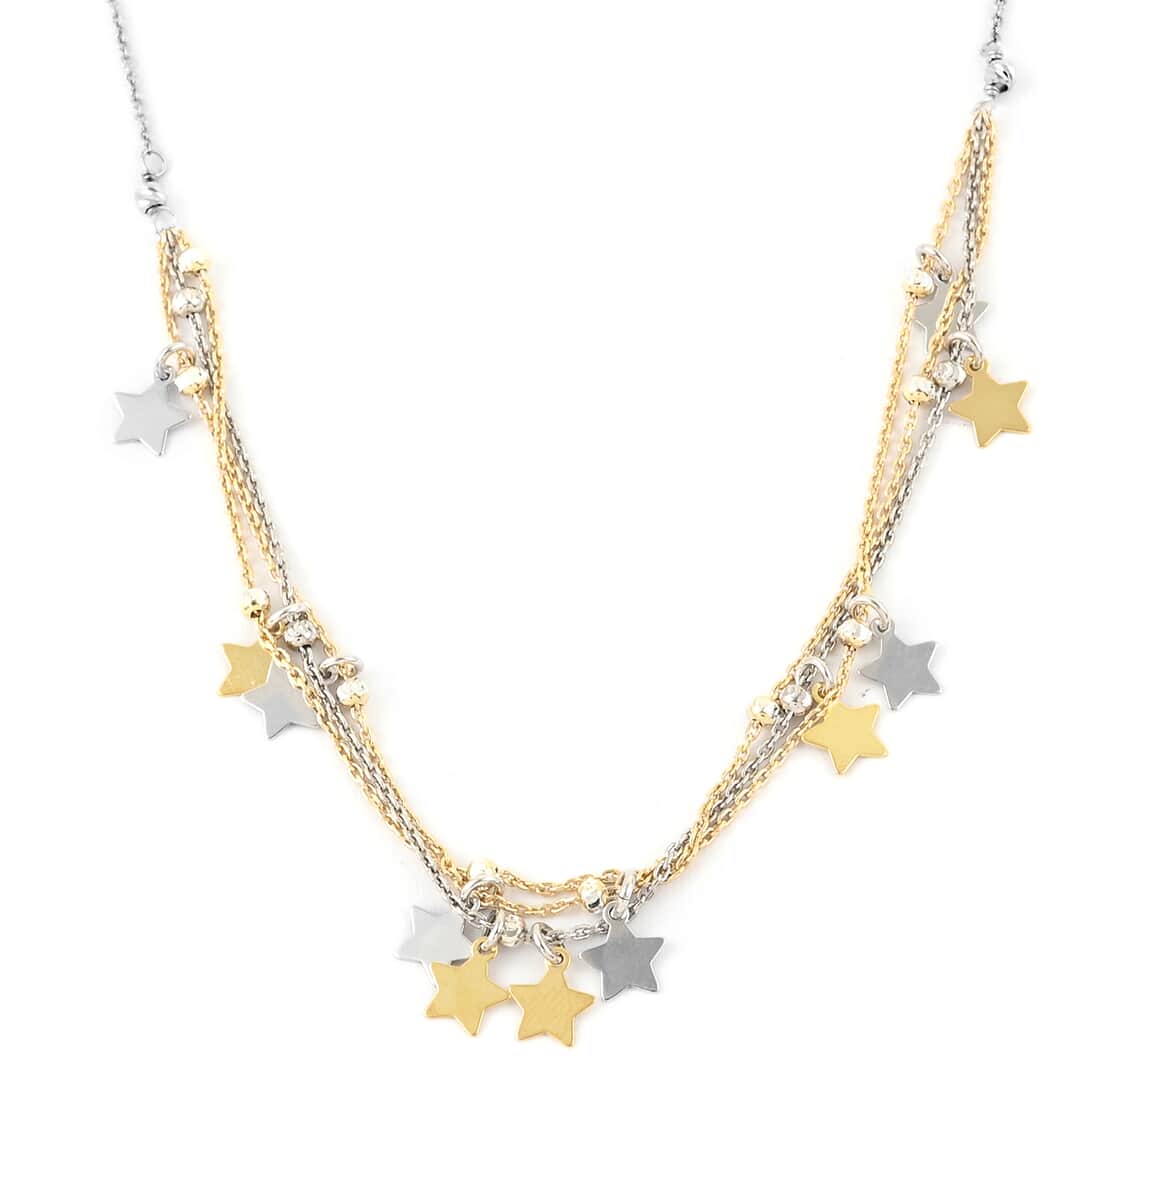 Silver and Gold Celestial Star and Moon Charms and Diamond Cut Beads Draped Layered Necklace (16 Inches) in 14K YG Over and Sterling Silver 4.50 Grams image number 0